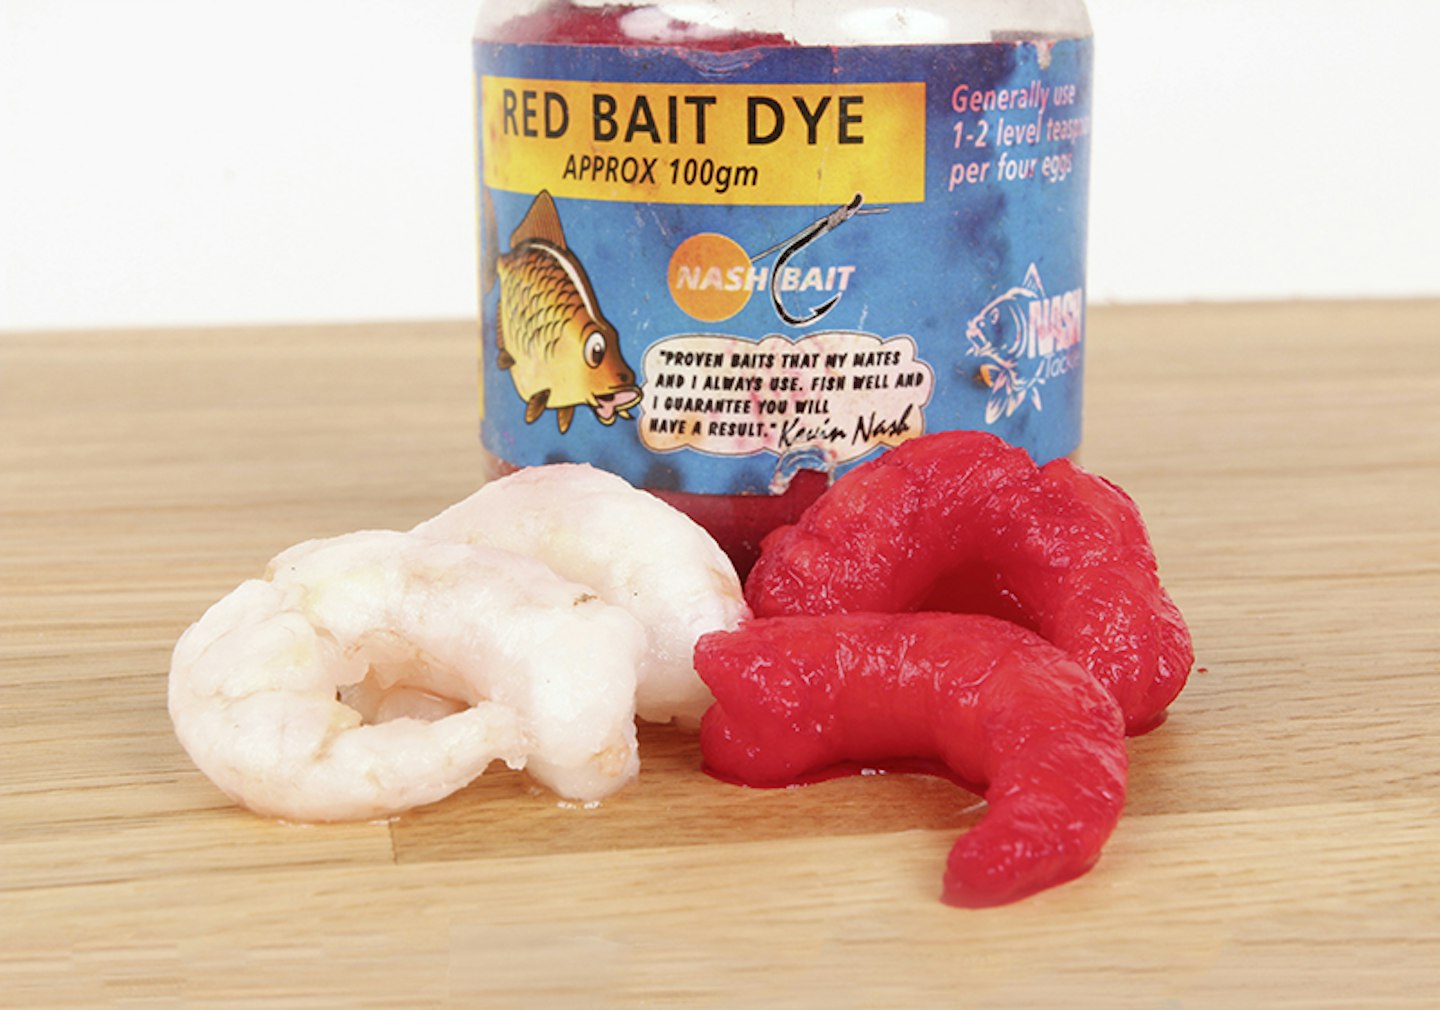 Leave prawns in water to which bright red bait dye has been added. 